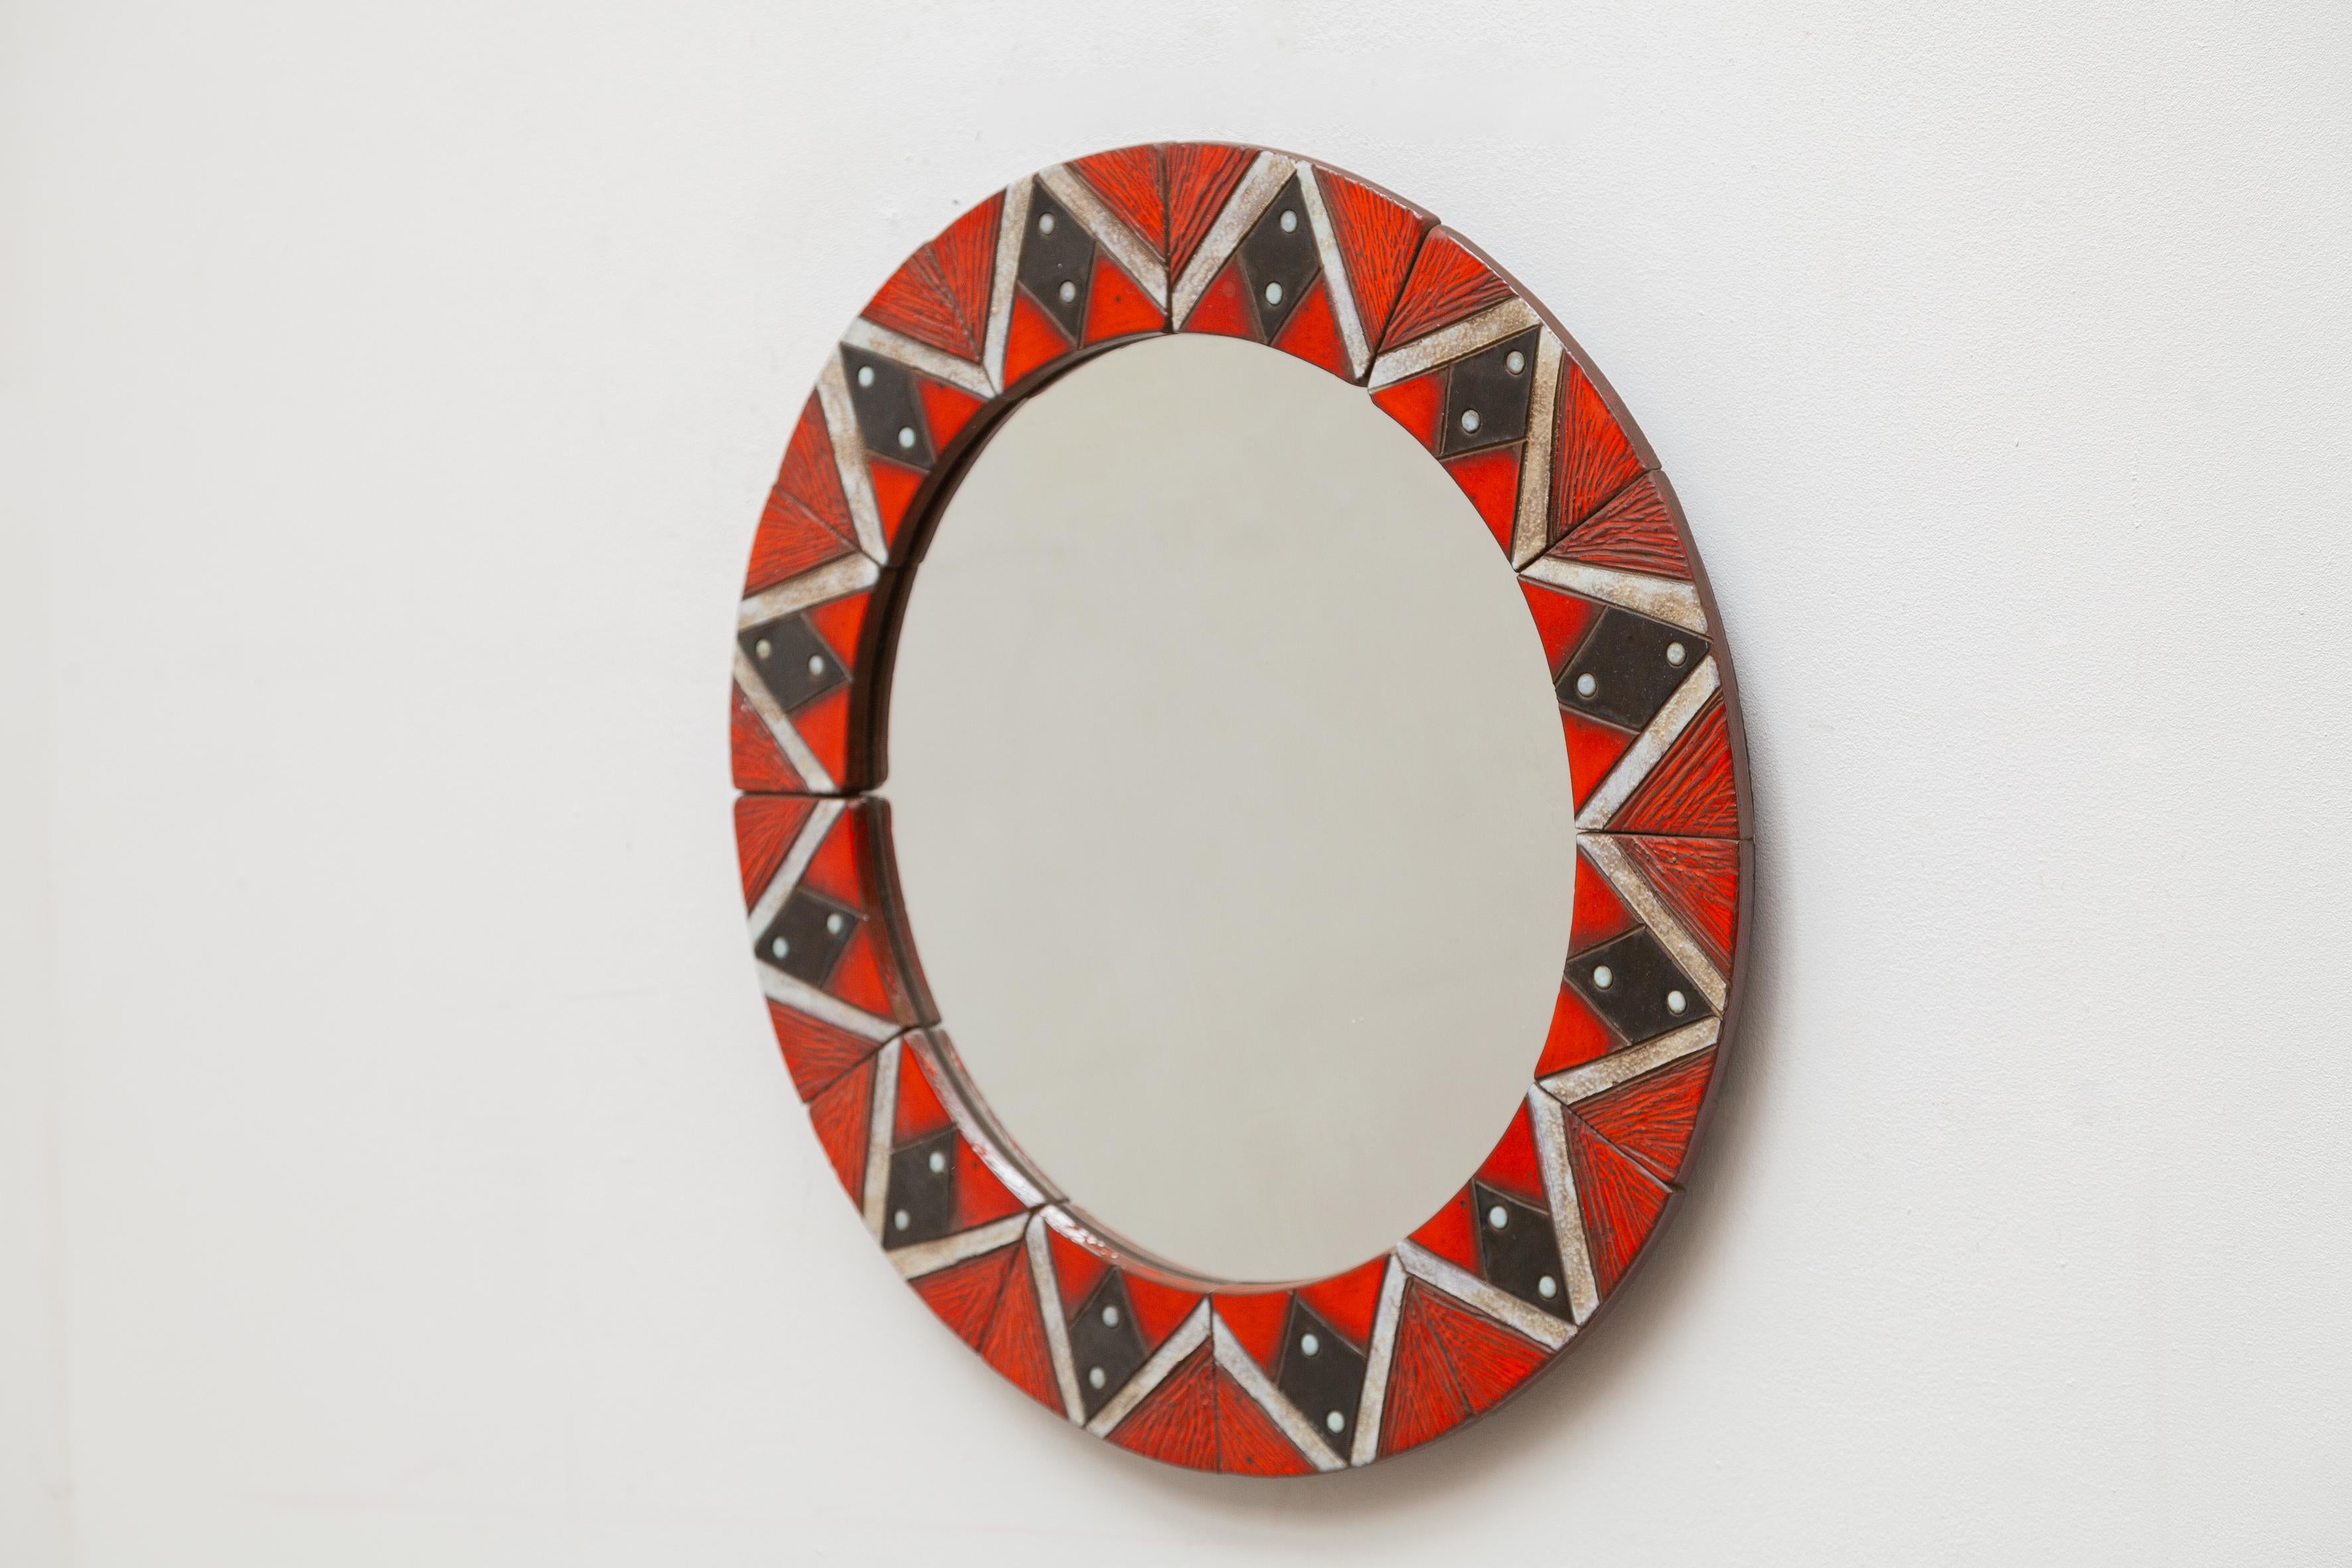 A beautiful example of the work of refined ceramic artist Oswald Tieberghien. The mirror consist of a mosaic geometric inlayed tiles in the colors red, black and white around a wall mounted glass mirror. 

Tieberghien studied at the Sint-Lucas